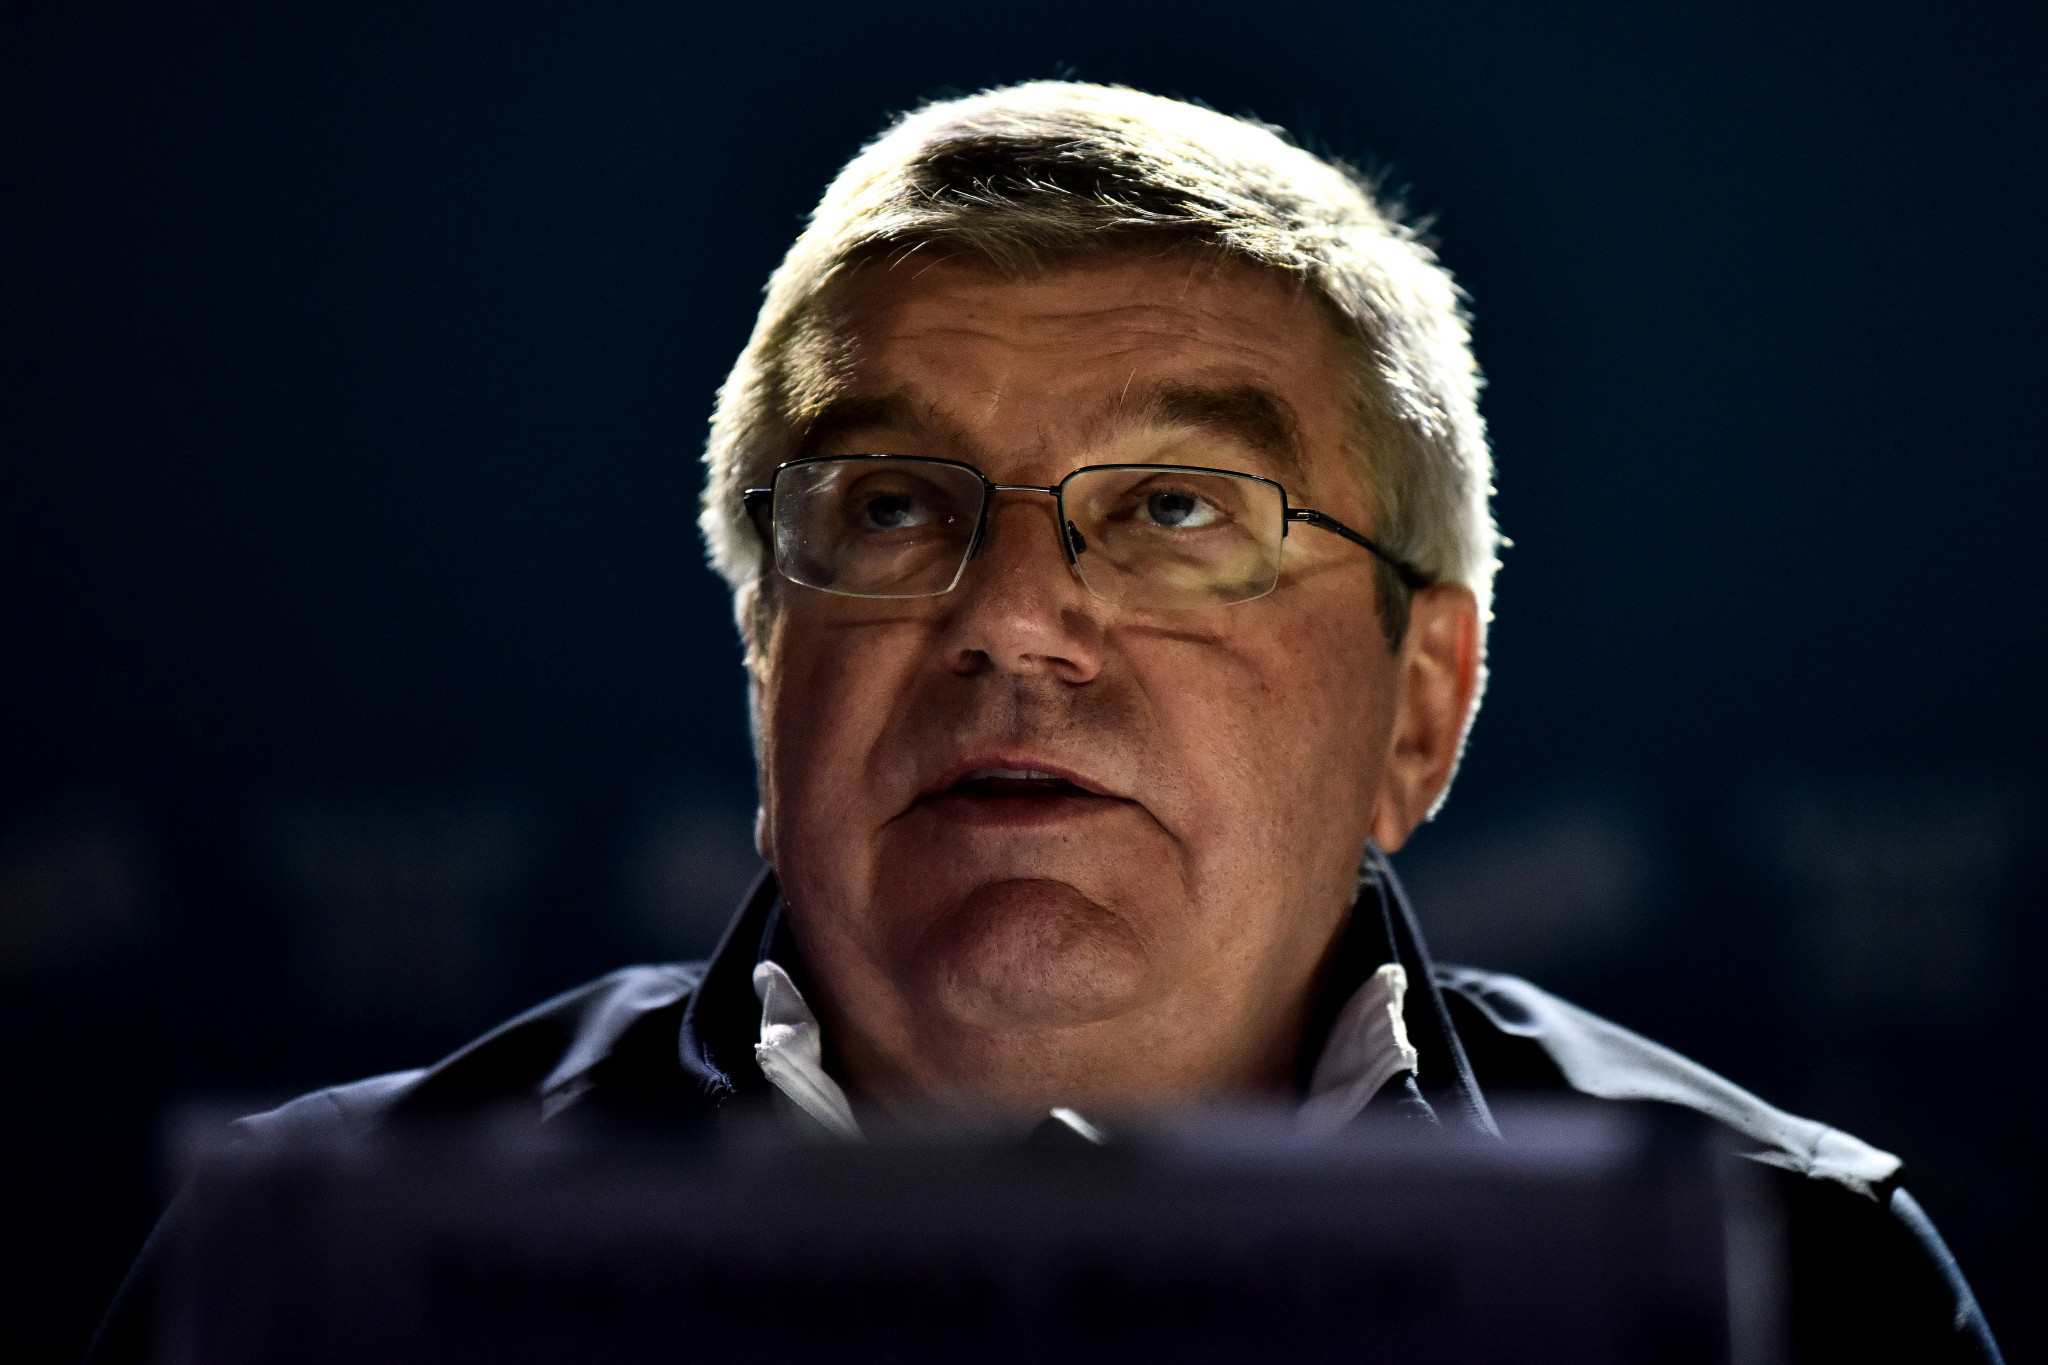 The IOC and its President Thomas Bach have directly and inherently warned Rakhimov's candidacy puts boxing's place at the Games in jeopardy ©Getty Images